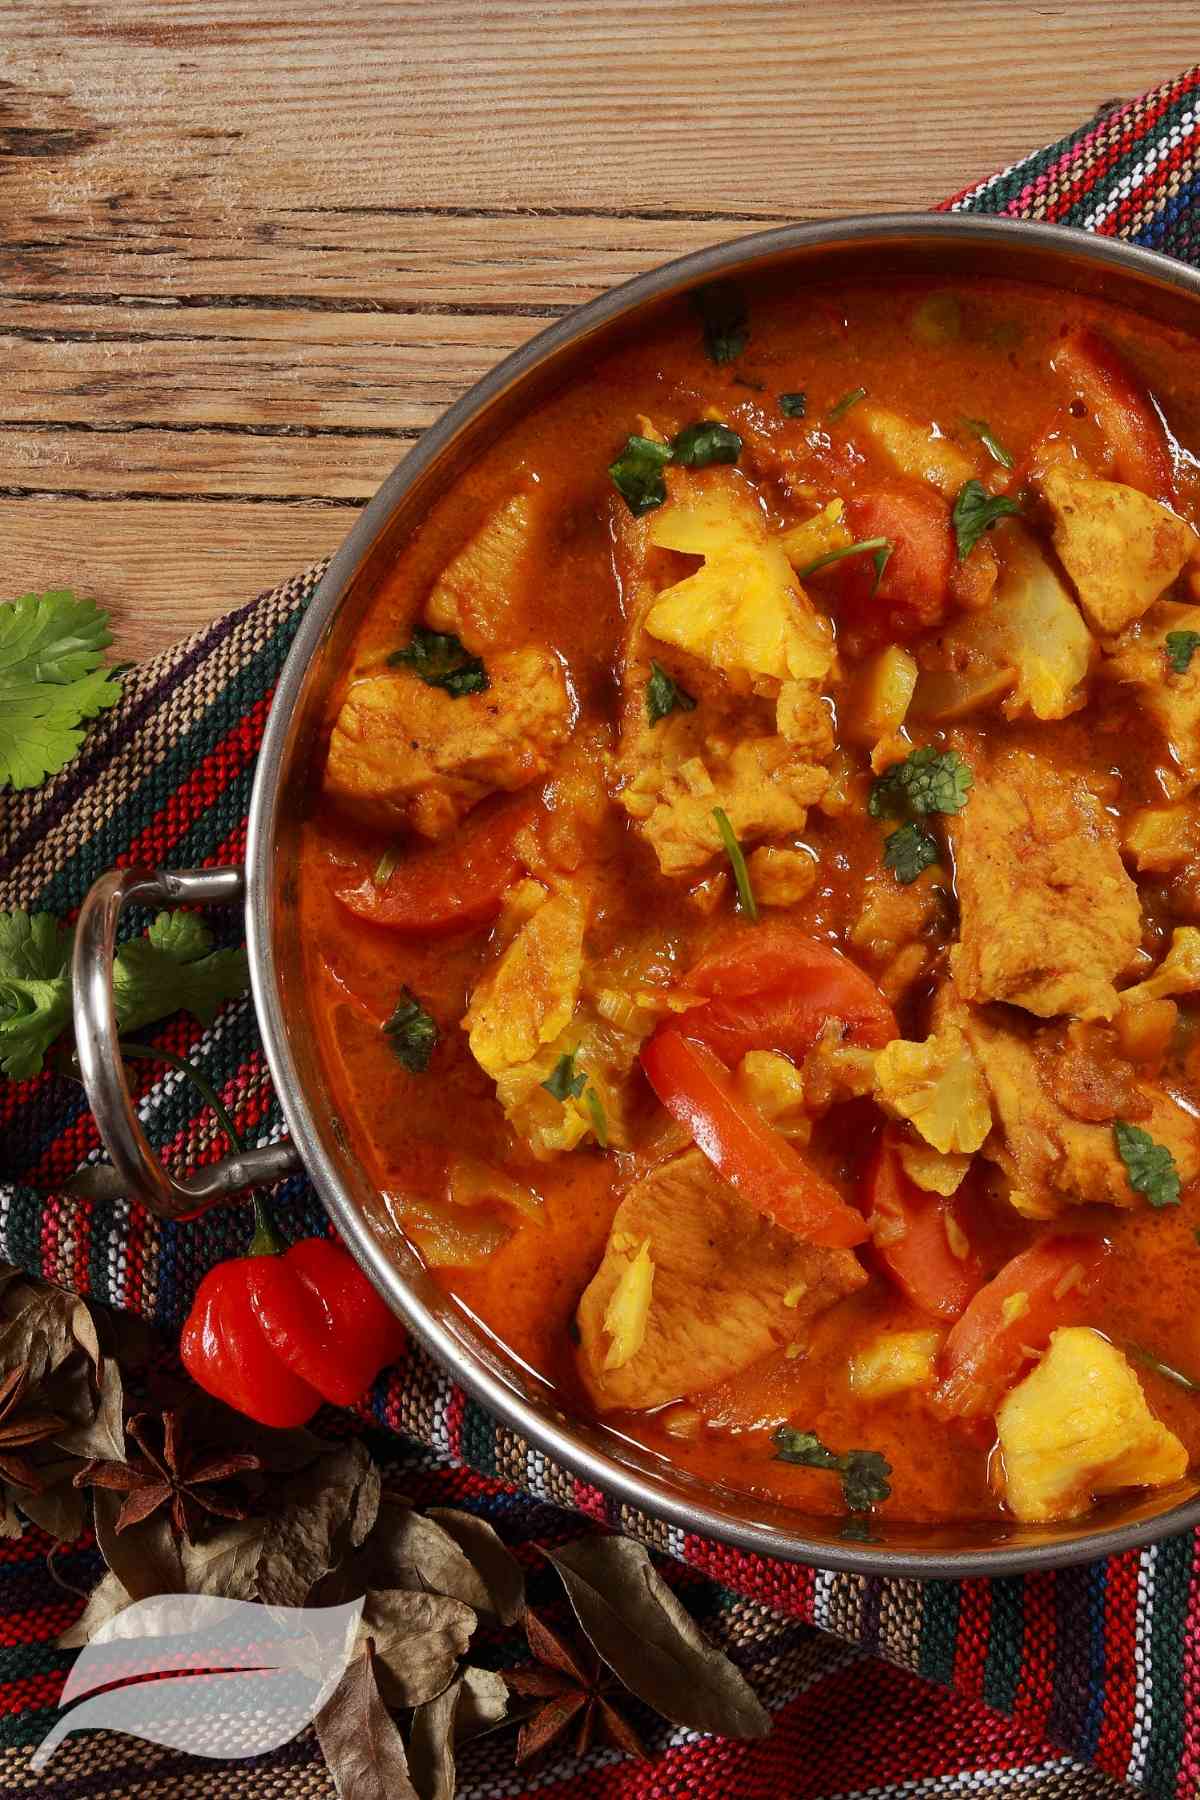 Easy chicken curry in a balti style dish with coriander leaves on the side